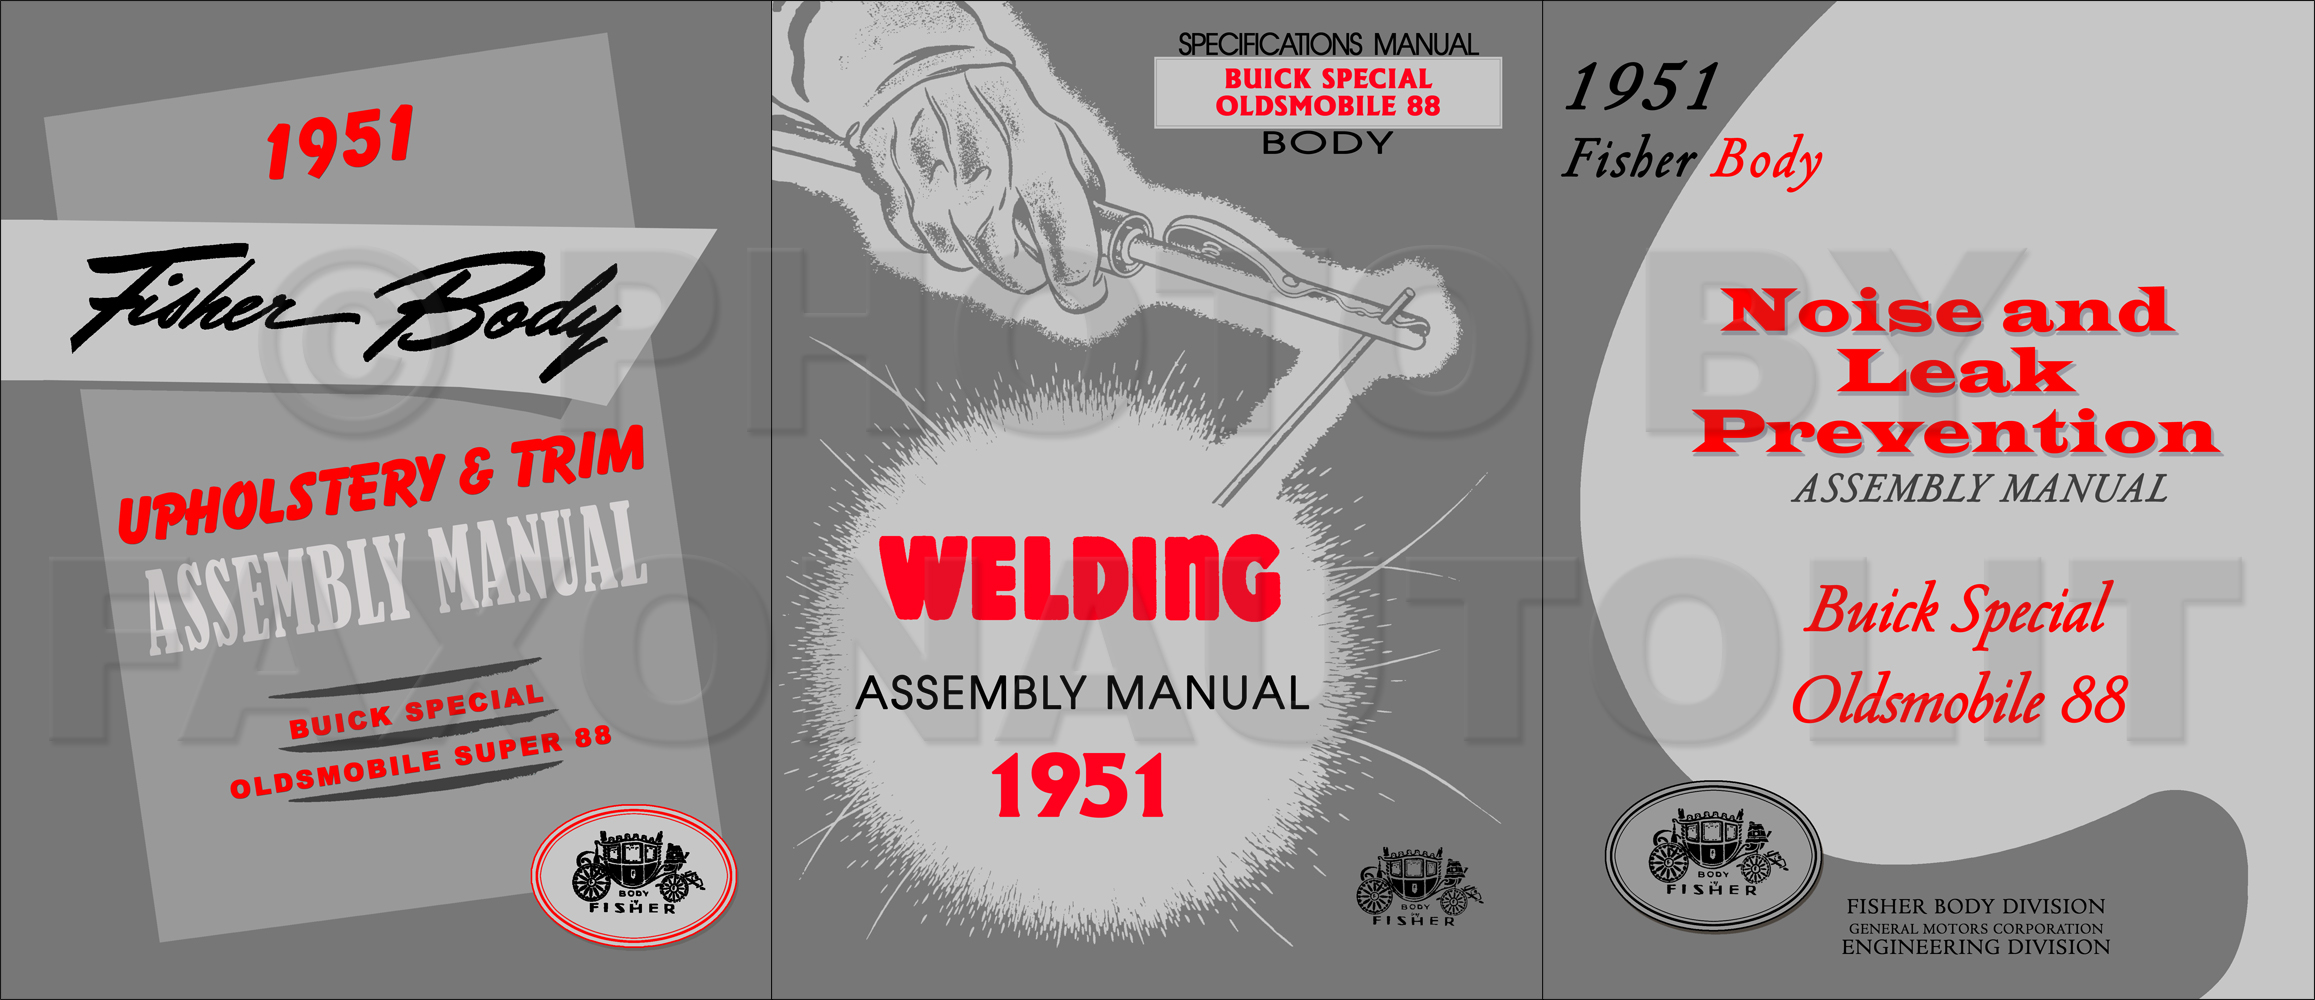 1951 Fisher Body Assembly Manual Set - Buick Special/Oldsmobile Super 88